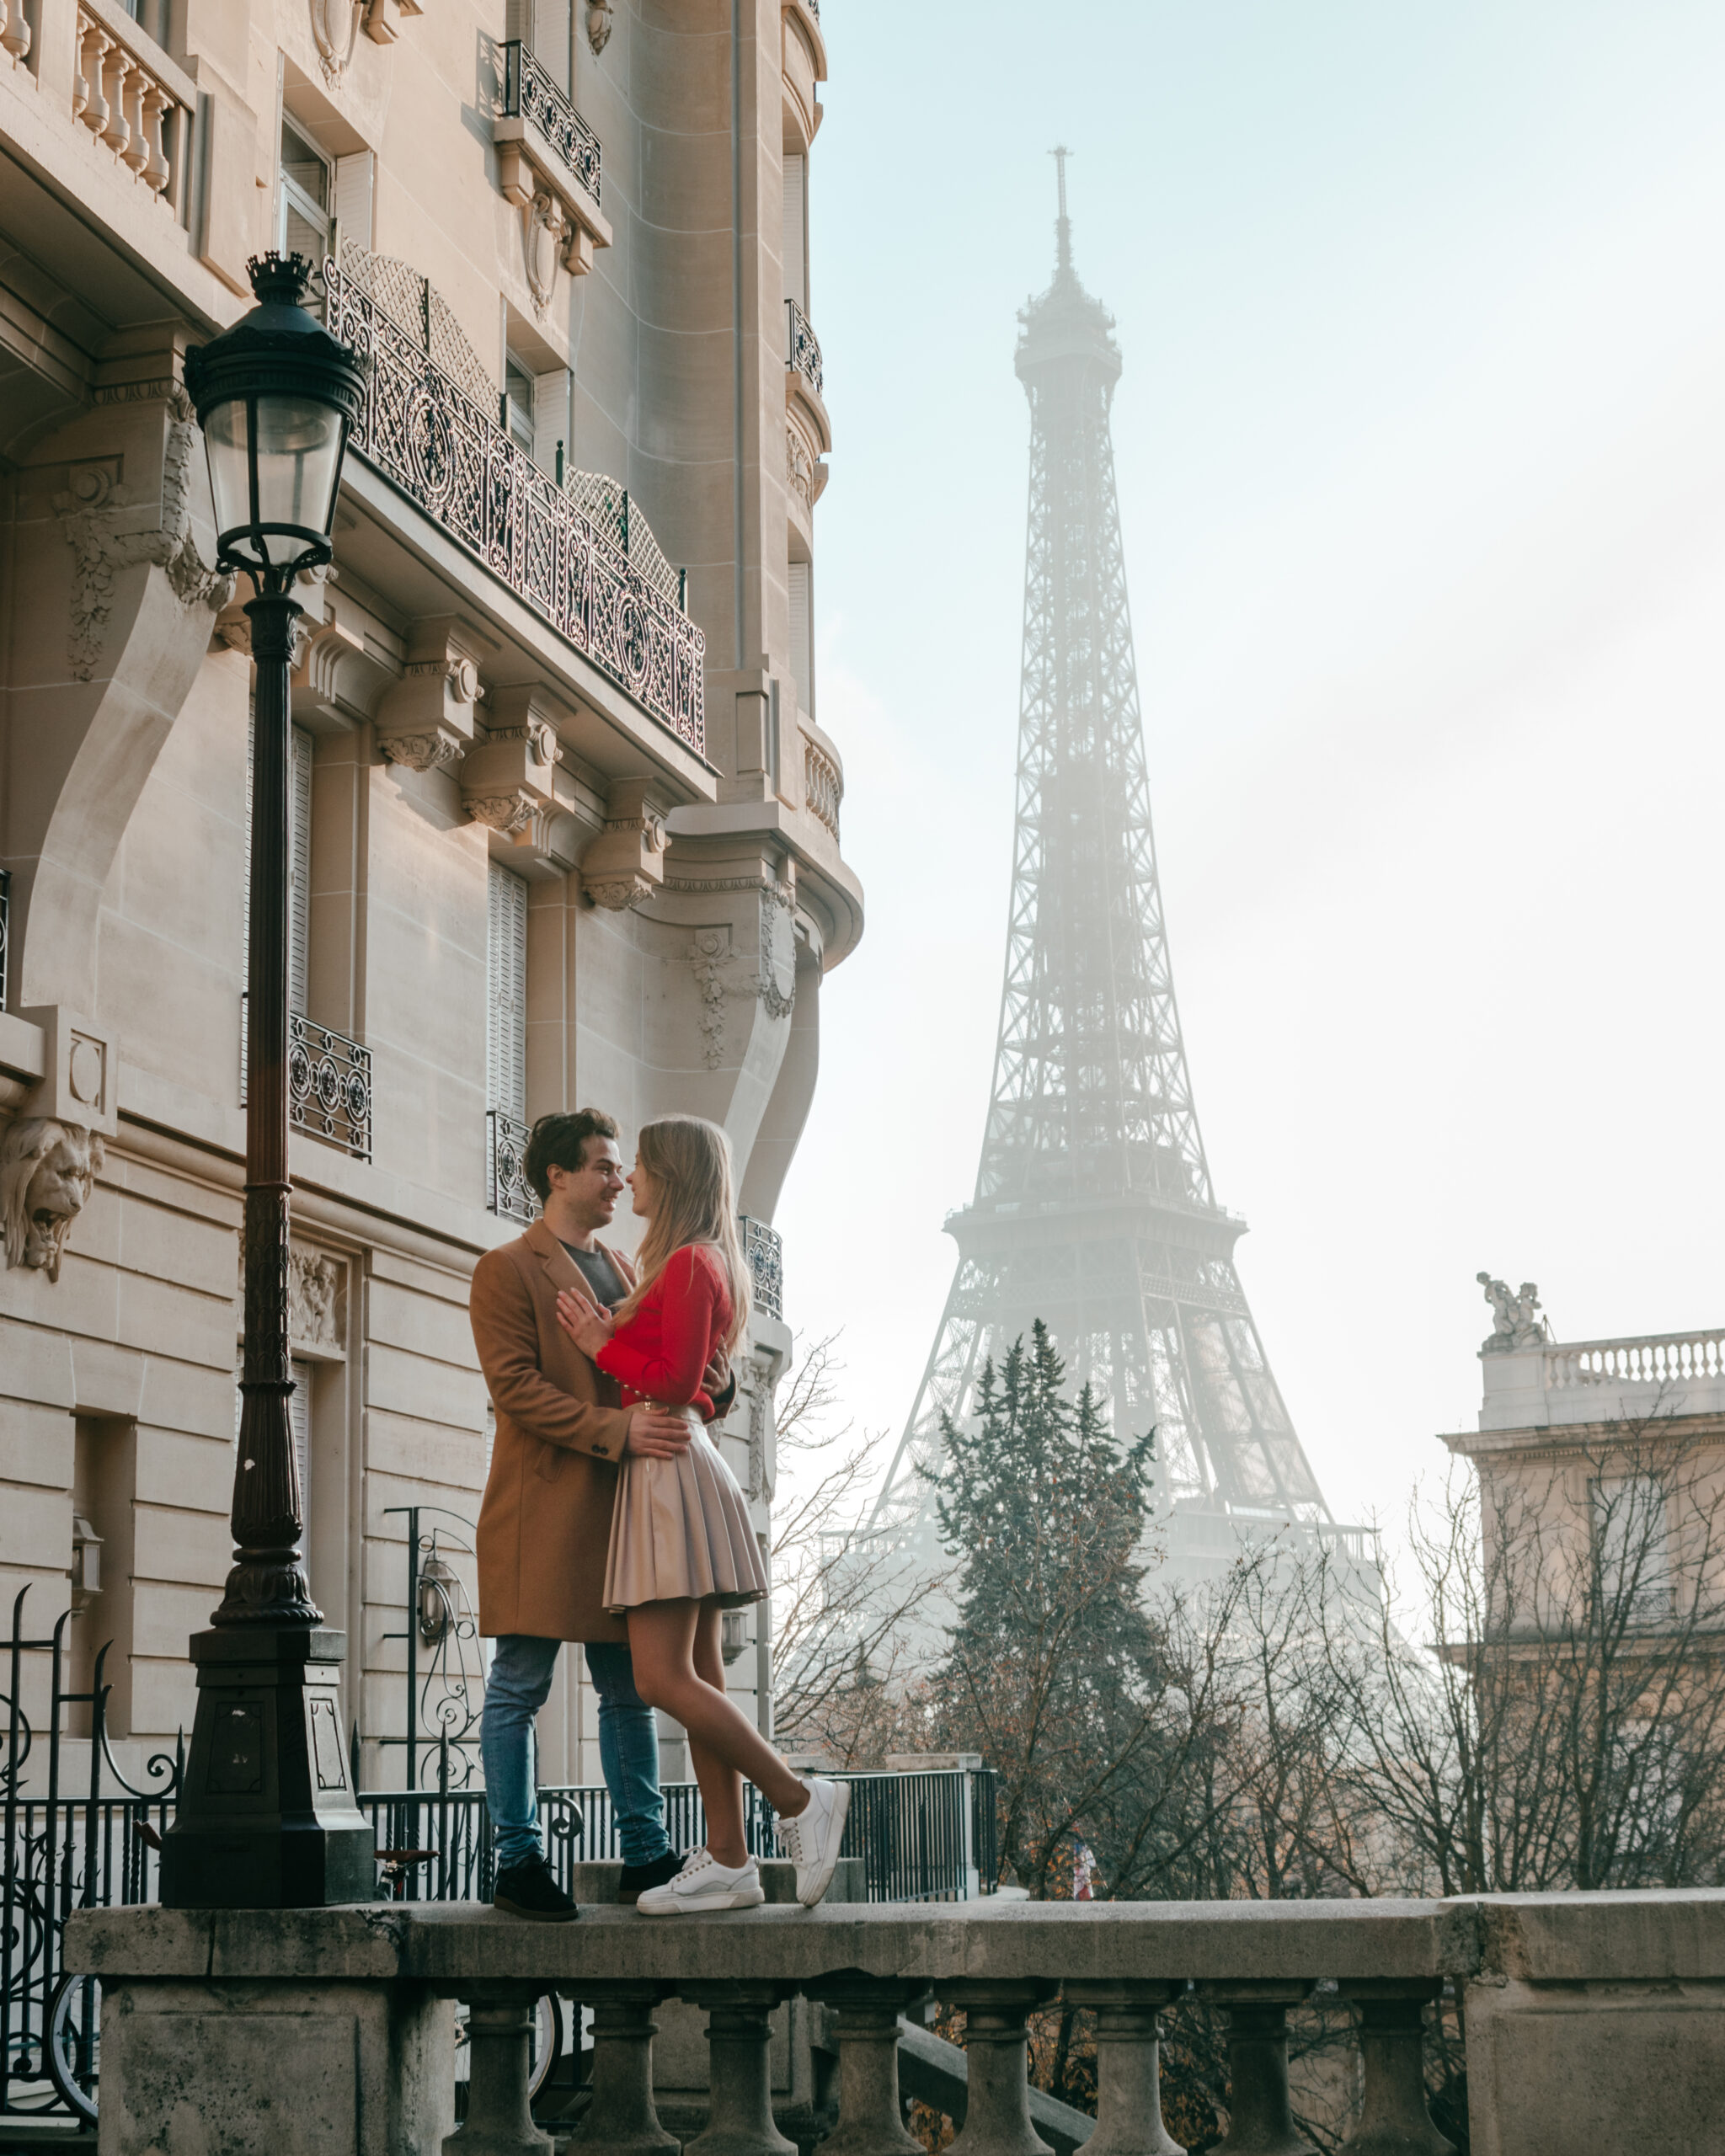 Couple trip in Paris standing in Avenue de Camoens with view on the Eifel Tower